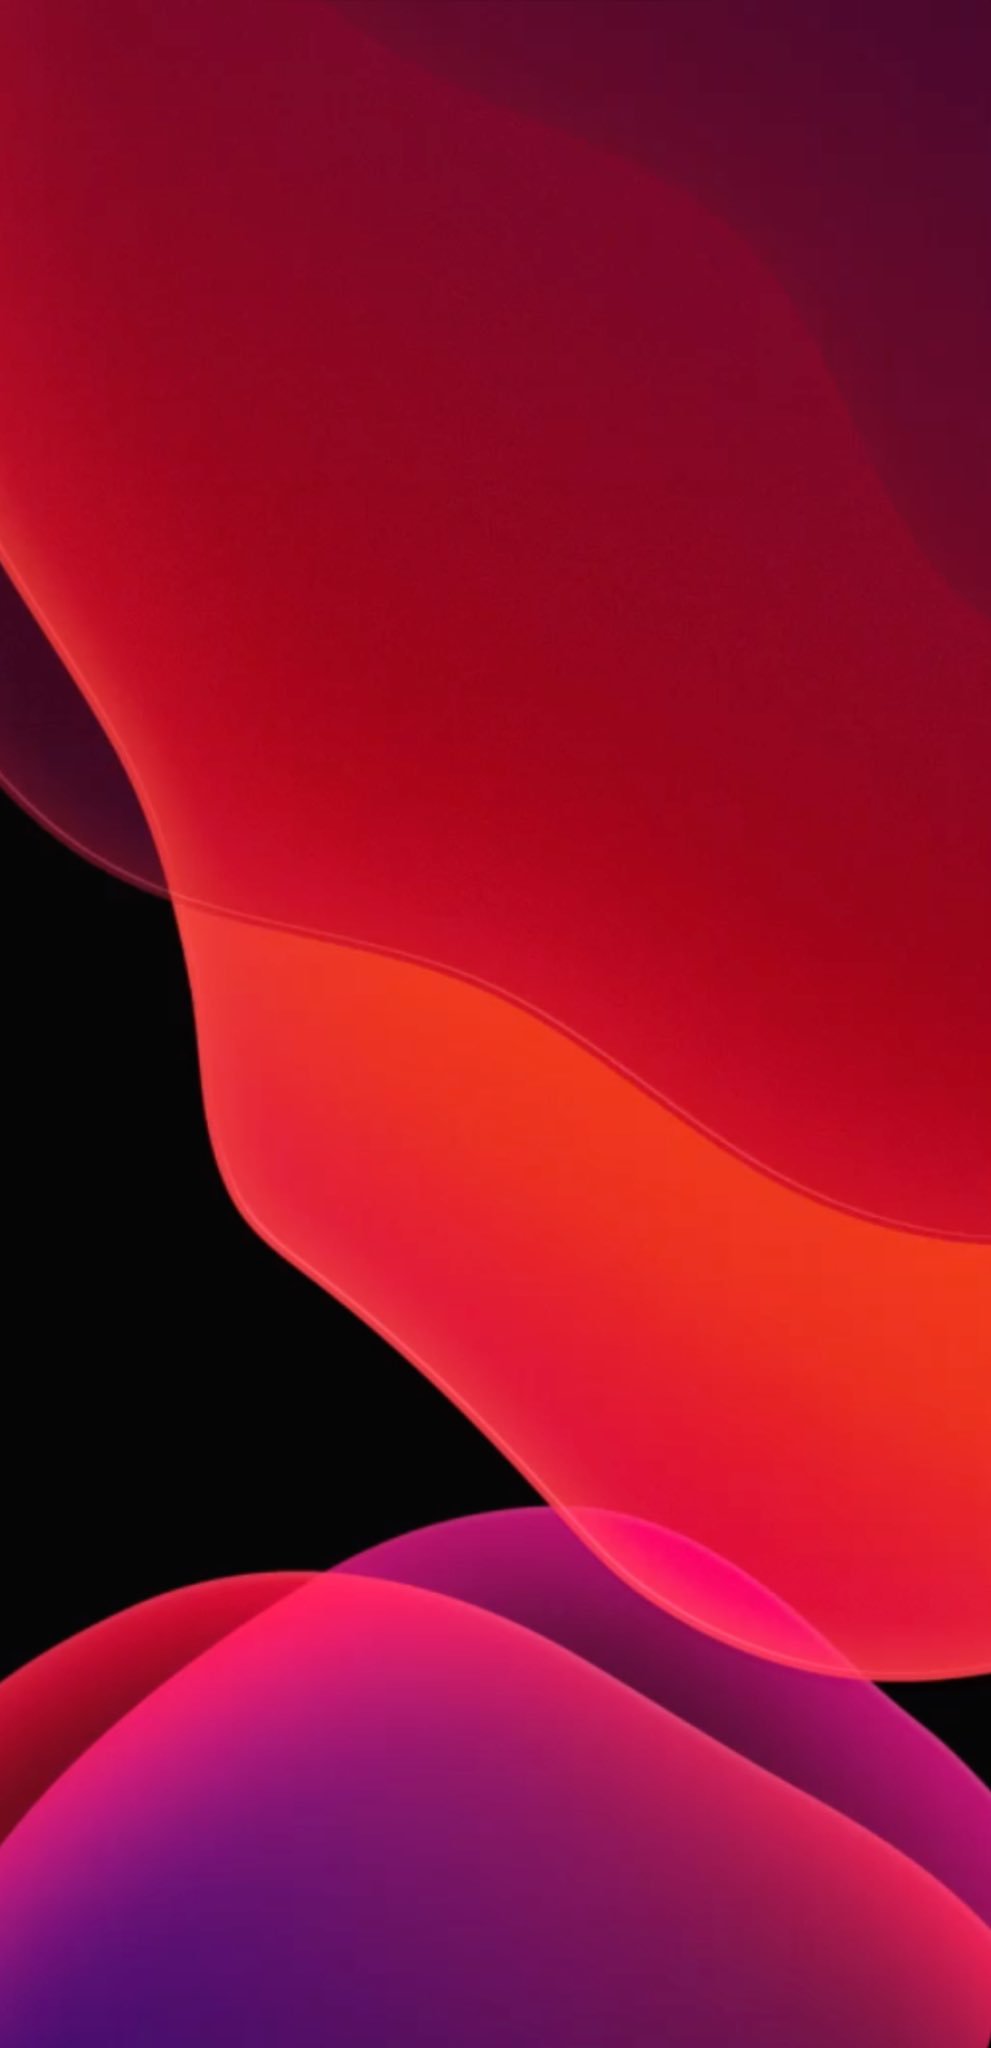 9techeleven Find The 2 Ios 13 Wallpapers In This Folder Follow And Support 9techeleven If You Like Our Content T Co Tgj3uzghh0 Wwdc Ios13 Ios Apple Appleevent Keynote Wallpaper Wallpapers T Co Pjuue1242n